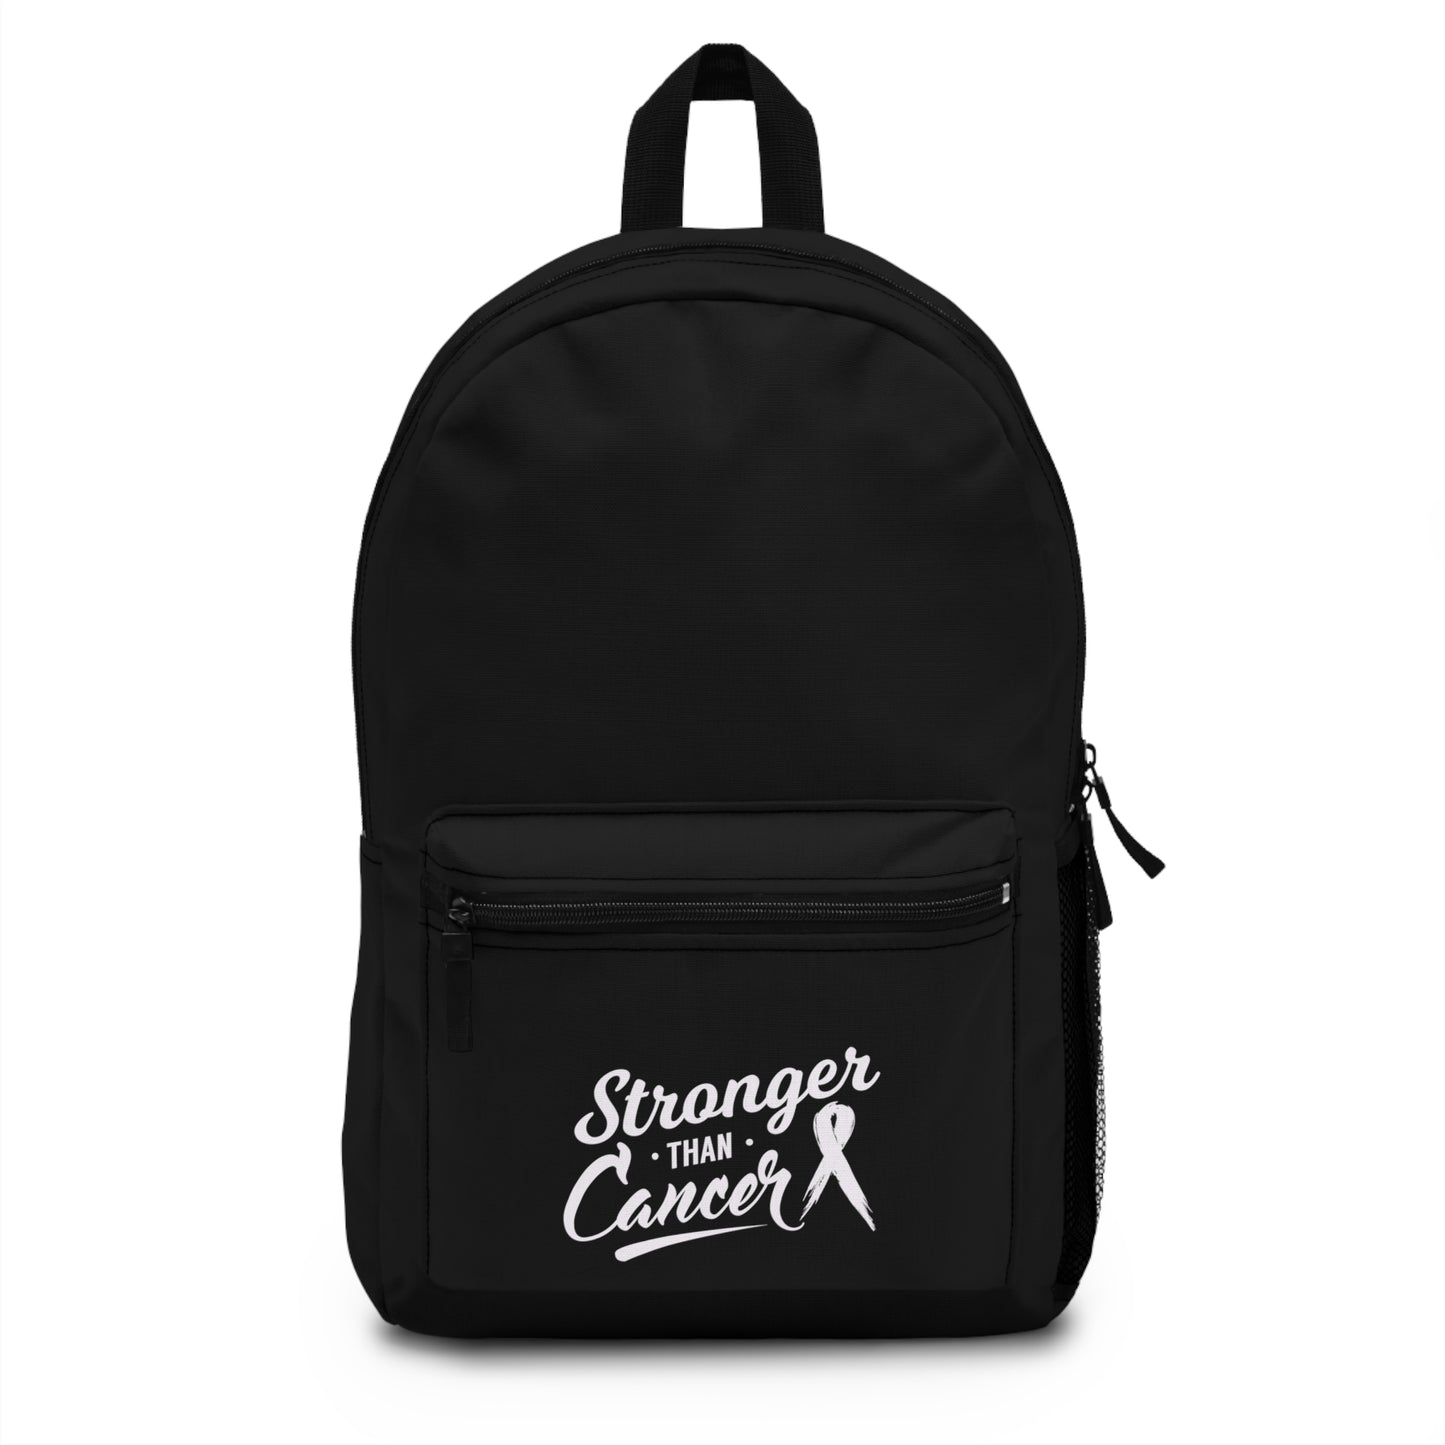 Stronger than Cancer Backpack (Made in USA)